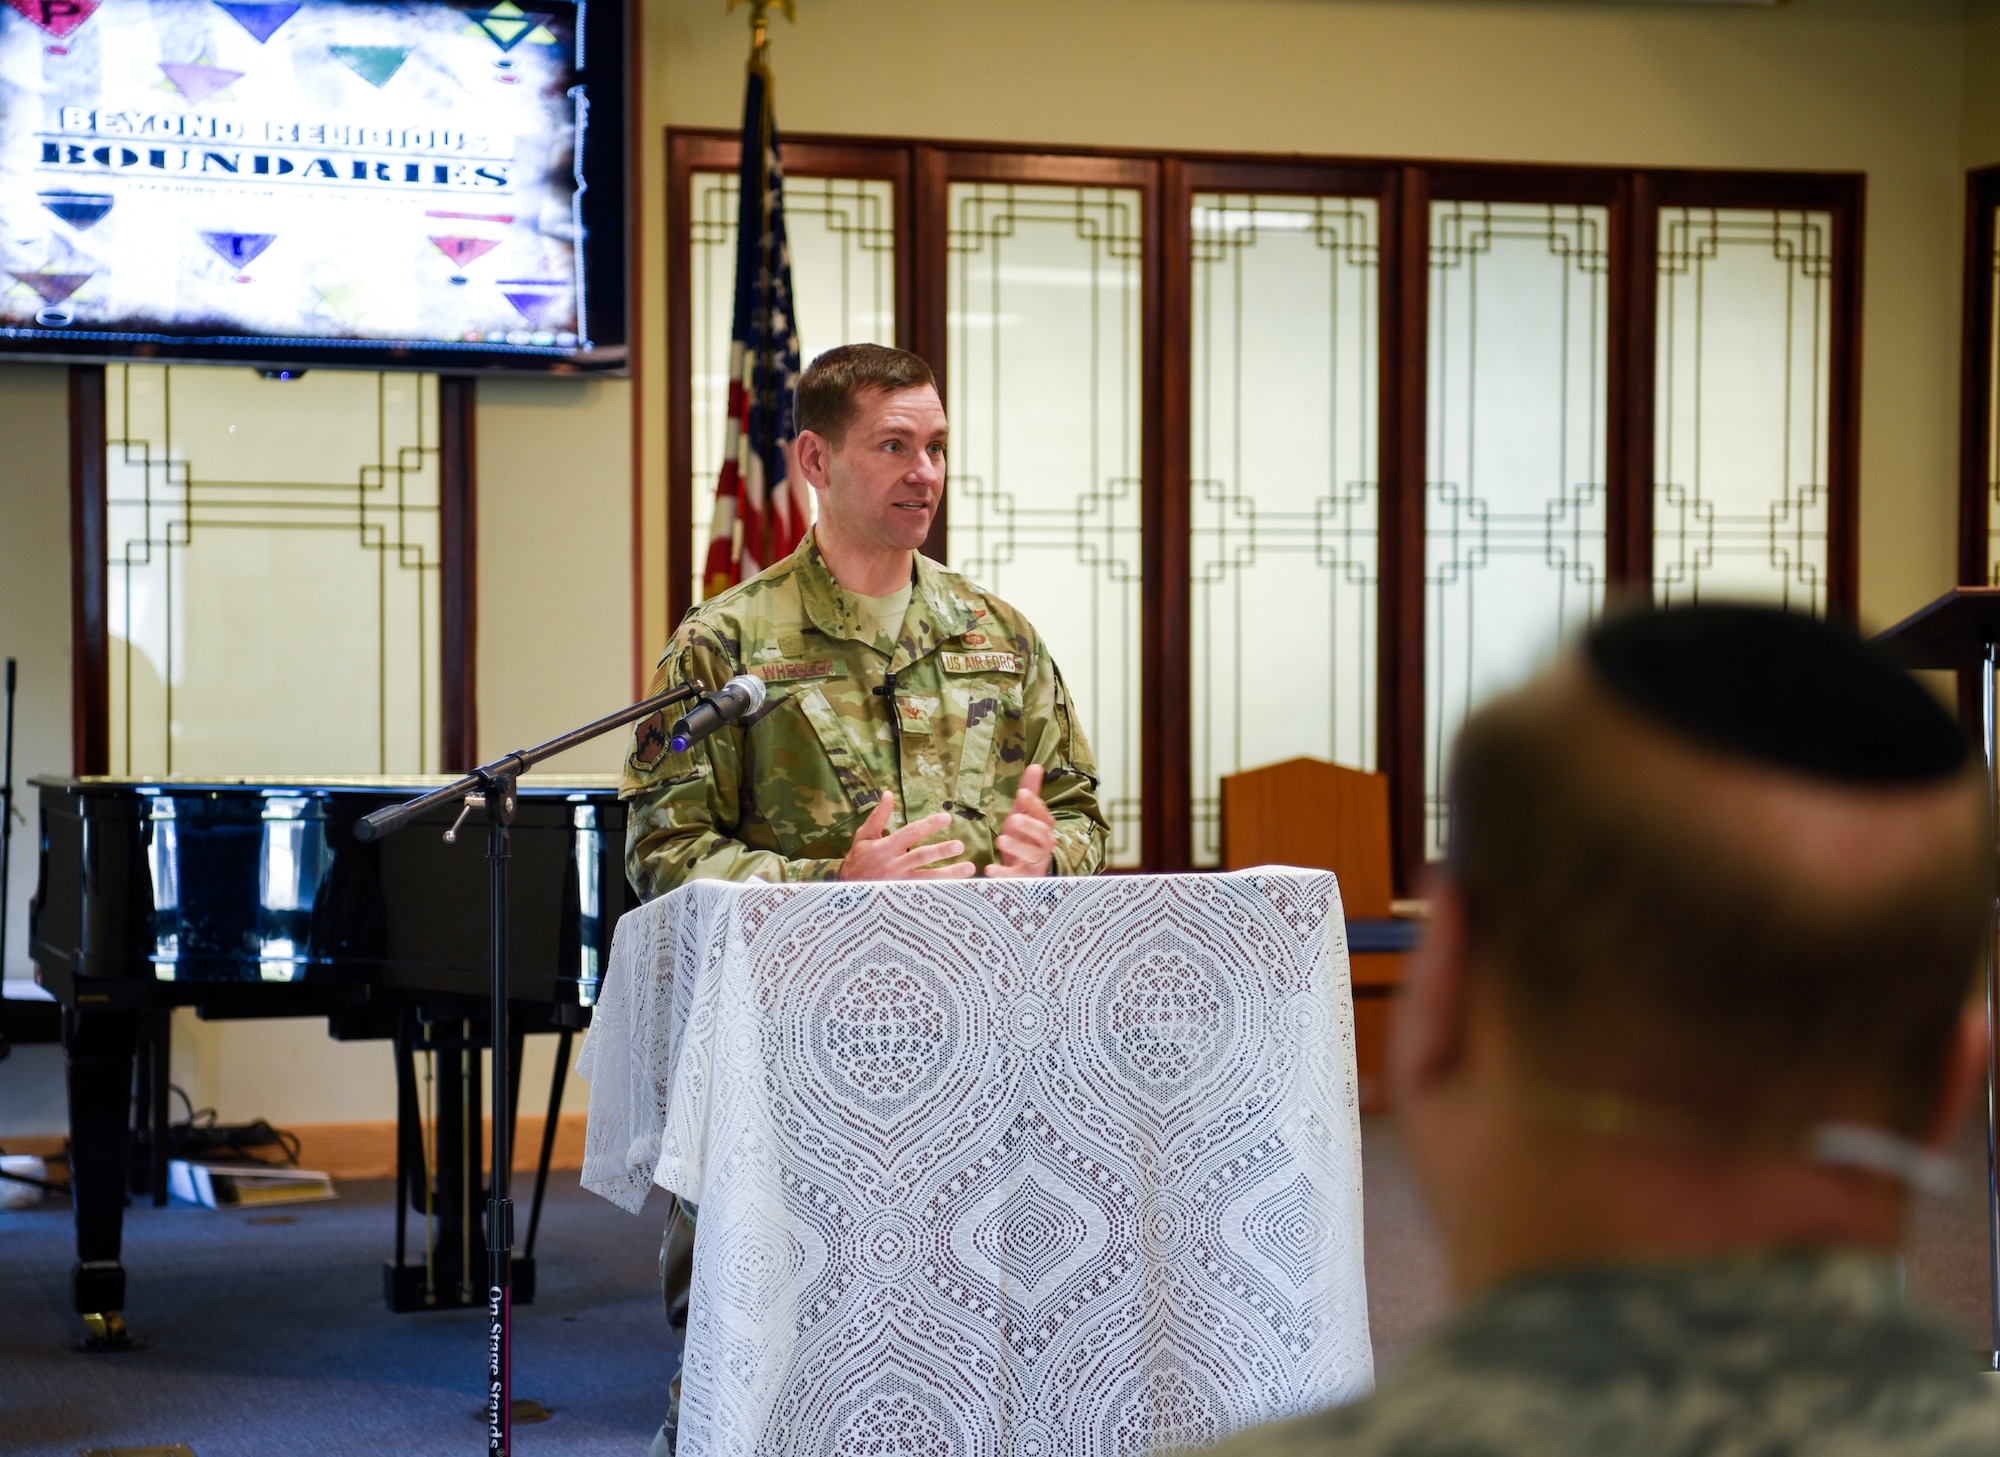 Col. Jon Wheeler, 8th Fighter Wing vice commander, provides opening remarks at a Holocaust Remembrance Ceremony in the Base Chapel at Kunsan Air Base, Republic of Korea on May 2, 2019. Wheeler shared how watching a movie about the Holocaust at a young age affected his view on humanity and inspired him to serve in the U.S. Air Force.  (U.S. Air Force photo by Capt. Remoshay Nelson)